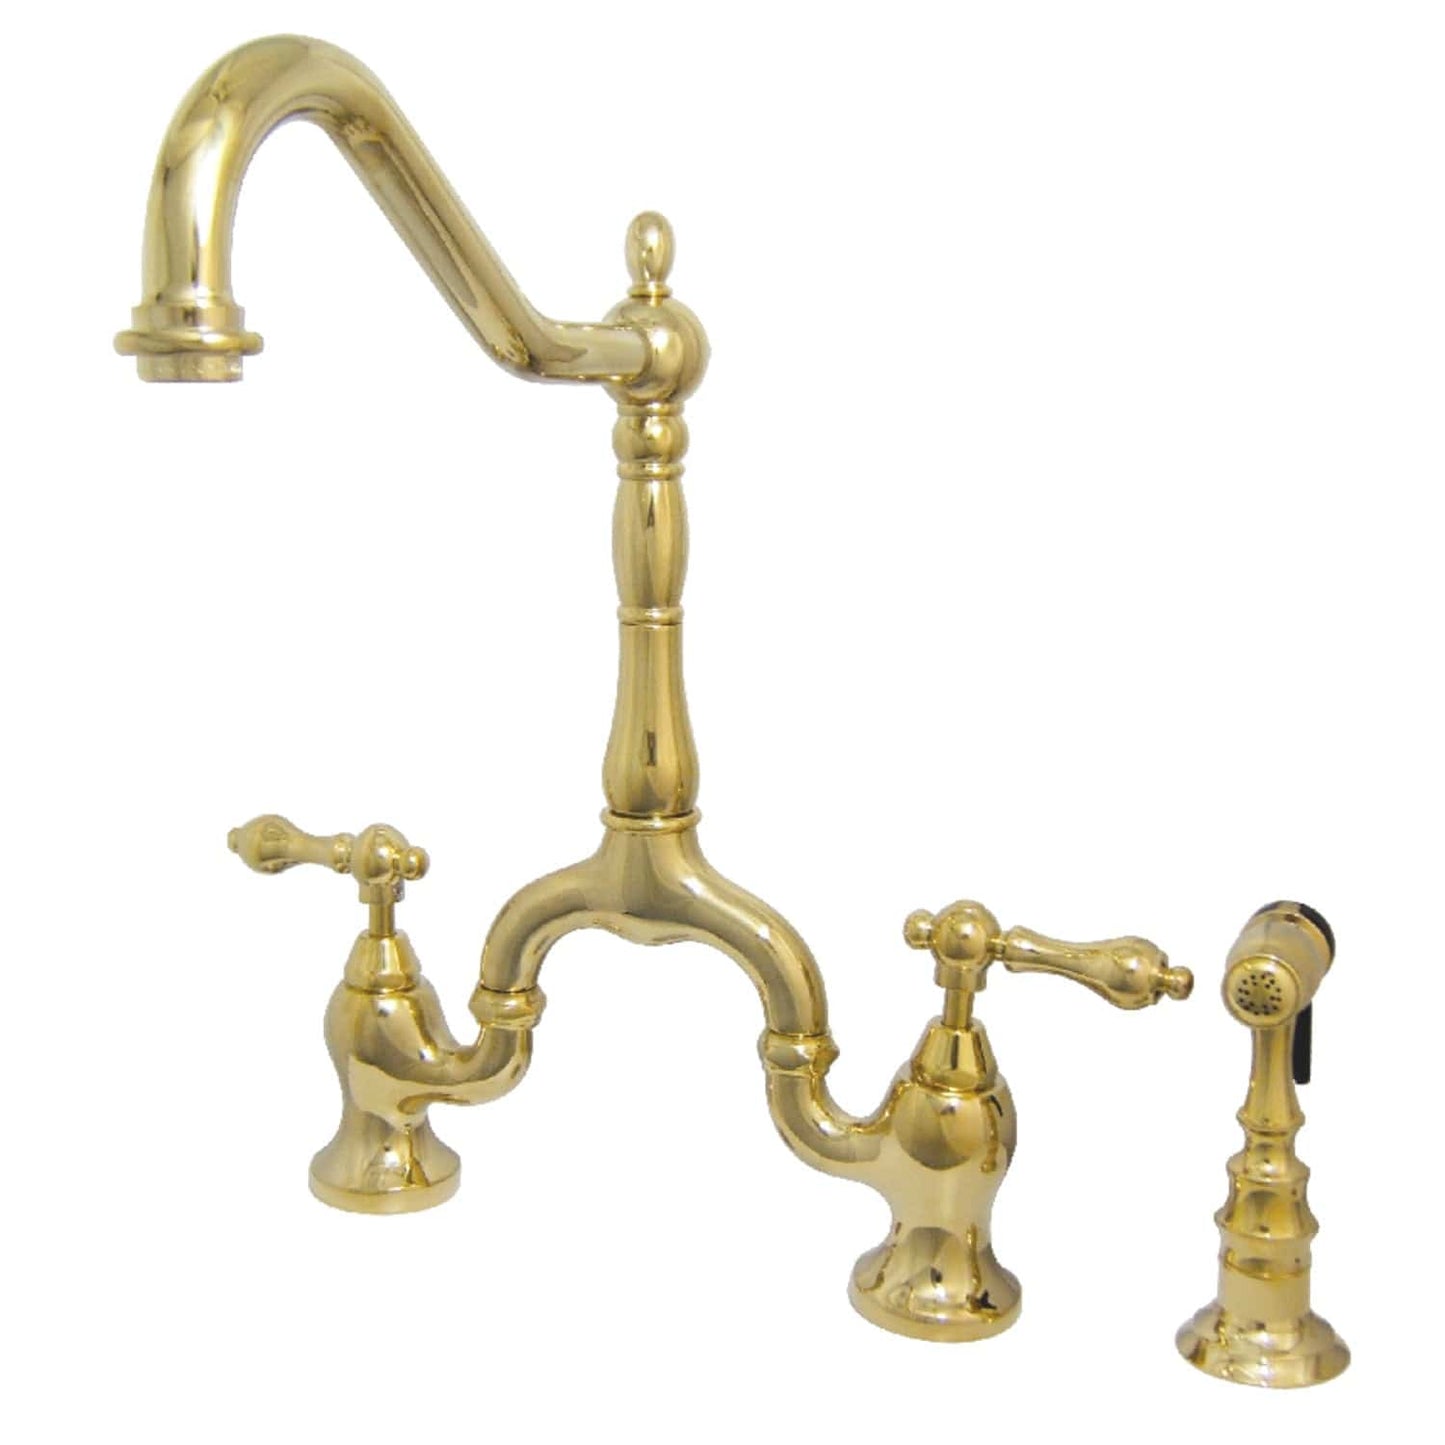 KINGSTON Brass English Country Kitchen Bridge Faucet with Brass Sprayer - Polished Brass